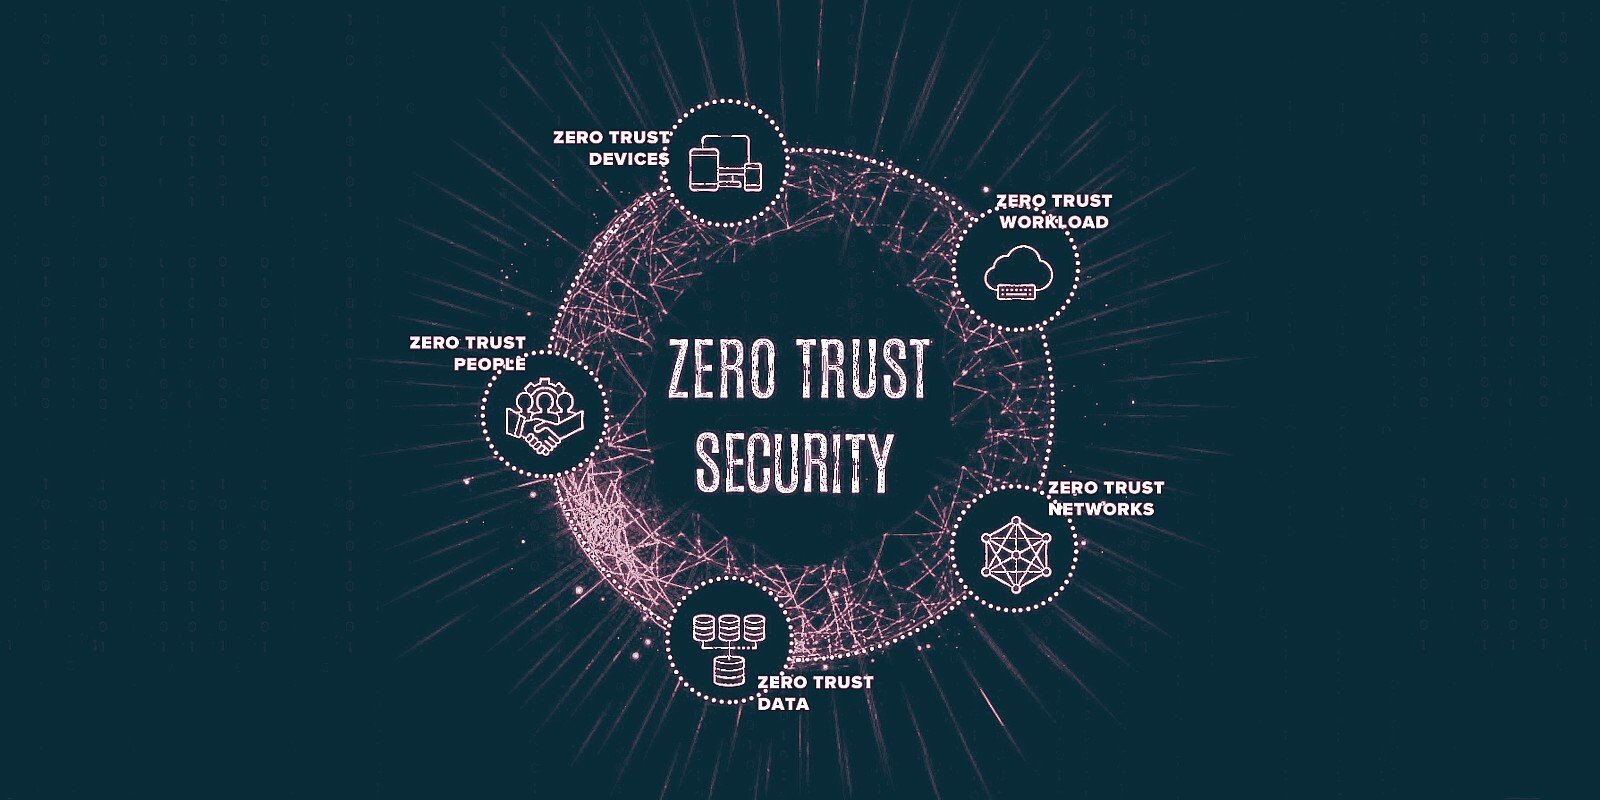 NSA and Microsoft promote a Zero Trust approach to cybersecurity